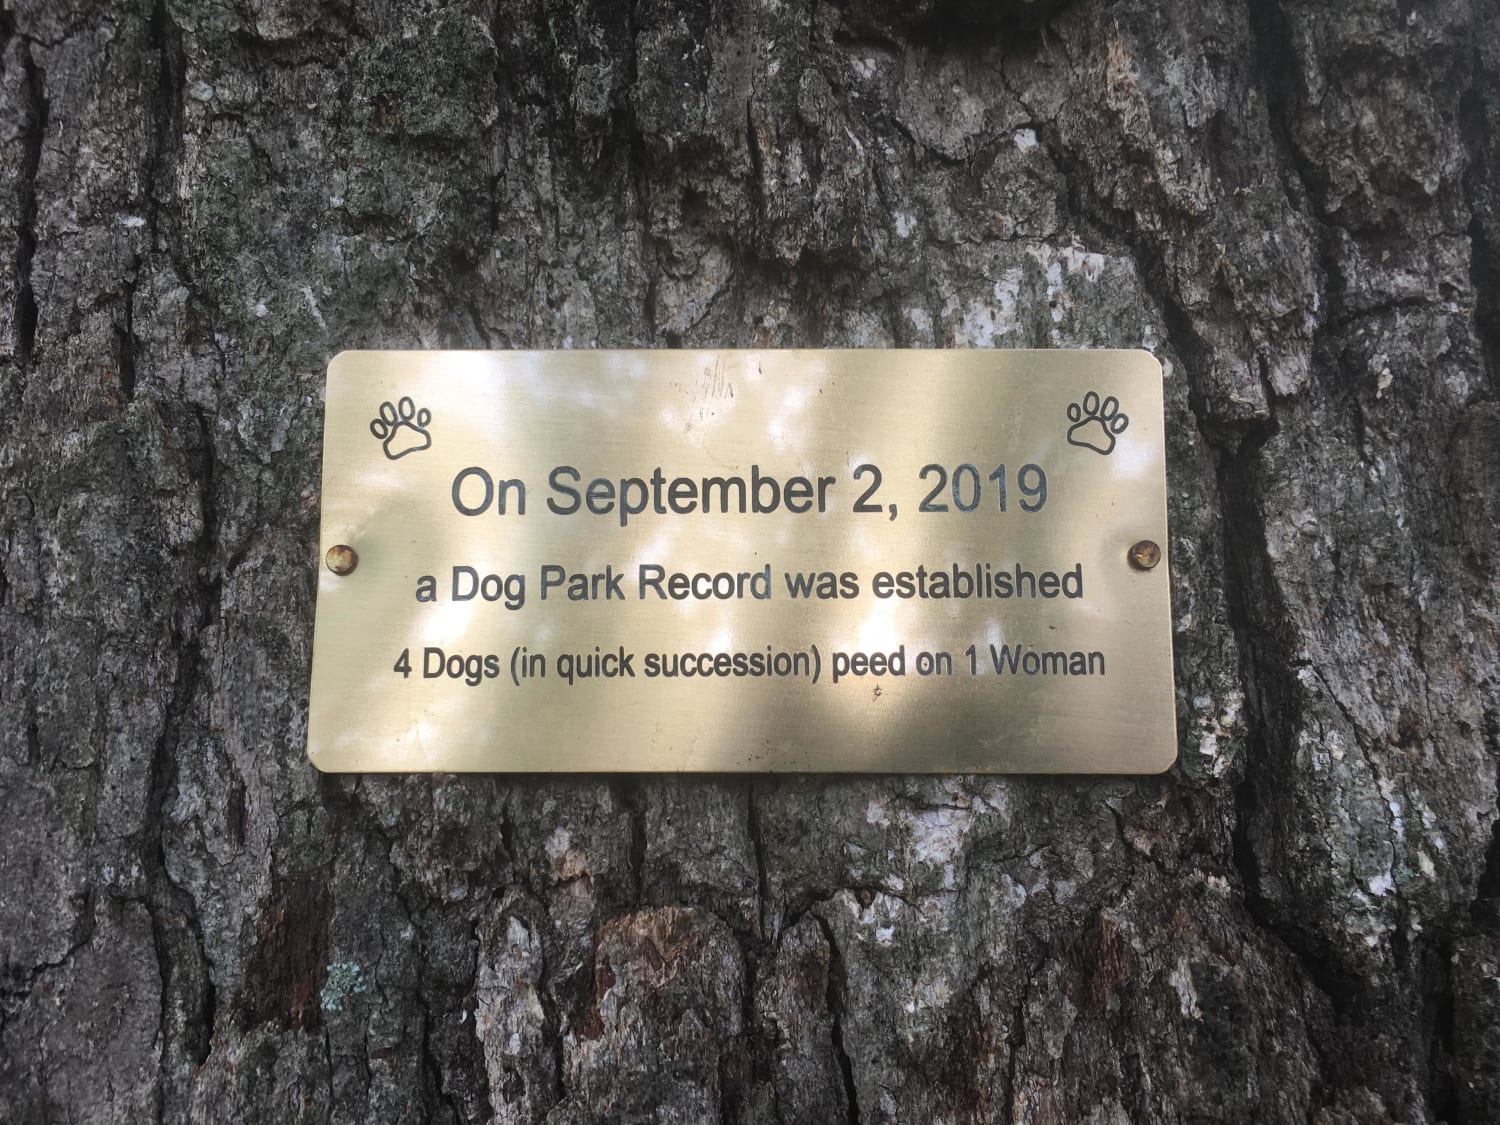 This plaque at the dog park commemorating a park record